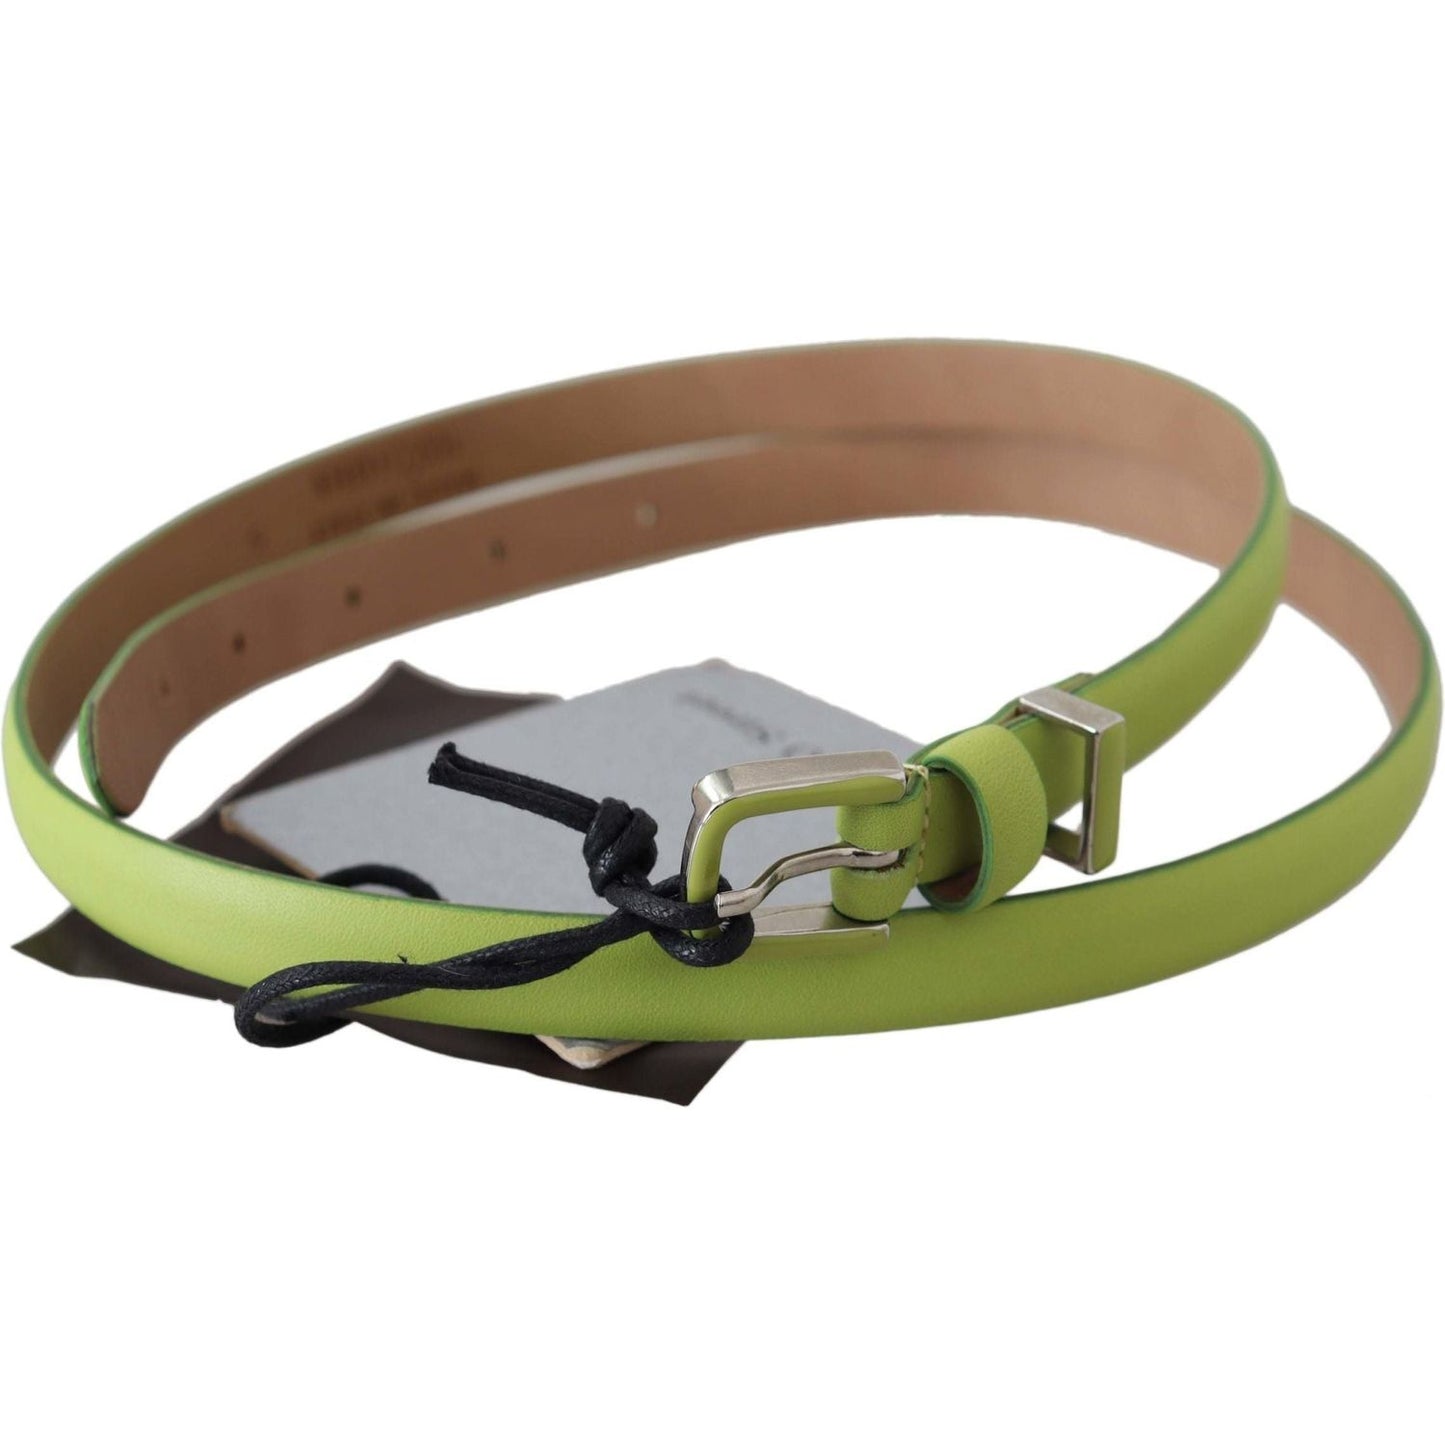 Scervino Street Classic Green Leather Belt with Silver-Tone Hardware green-leather-chartreuse-silver-green-buckle-belt Belt IMG_6303-scaled-31e656f0-42e.jpg